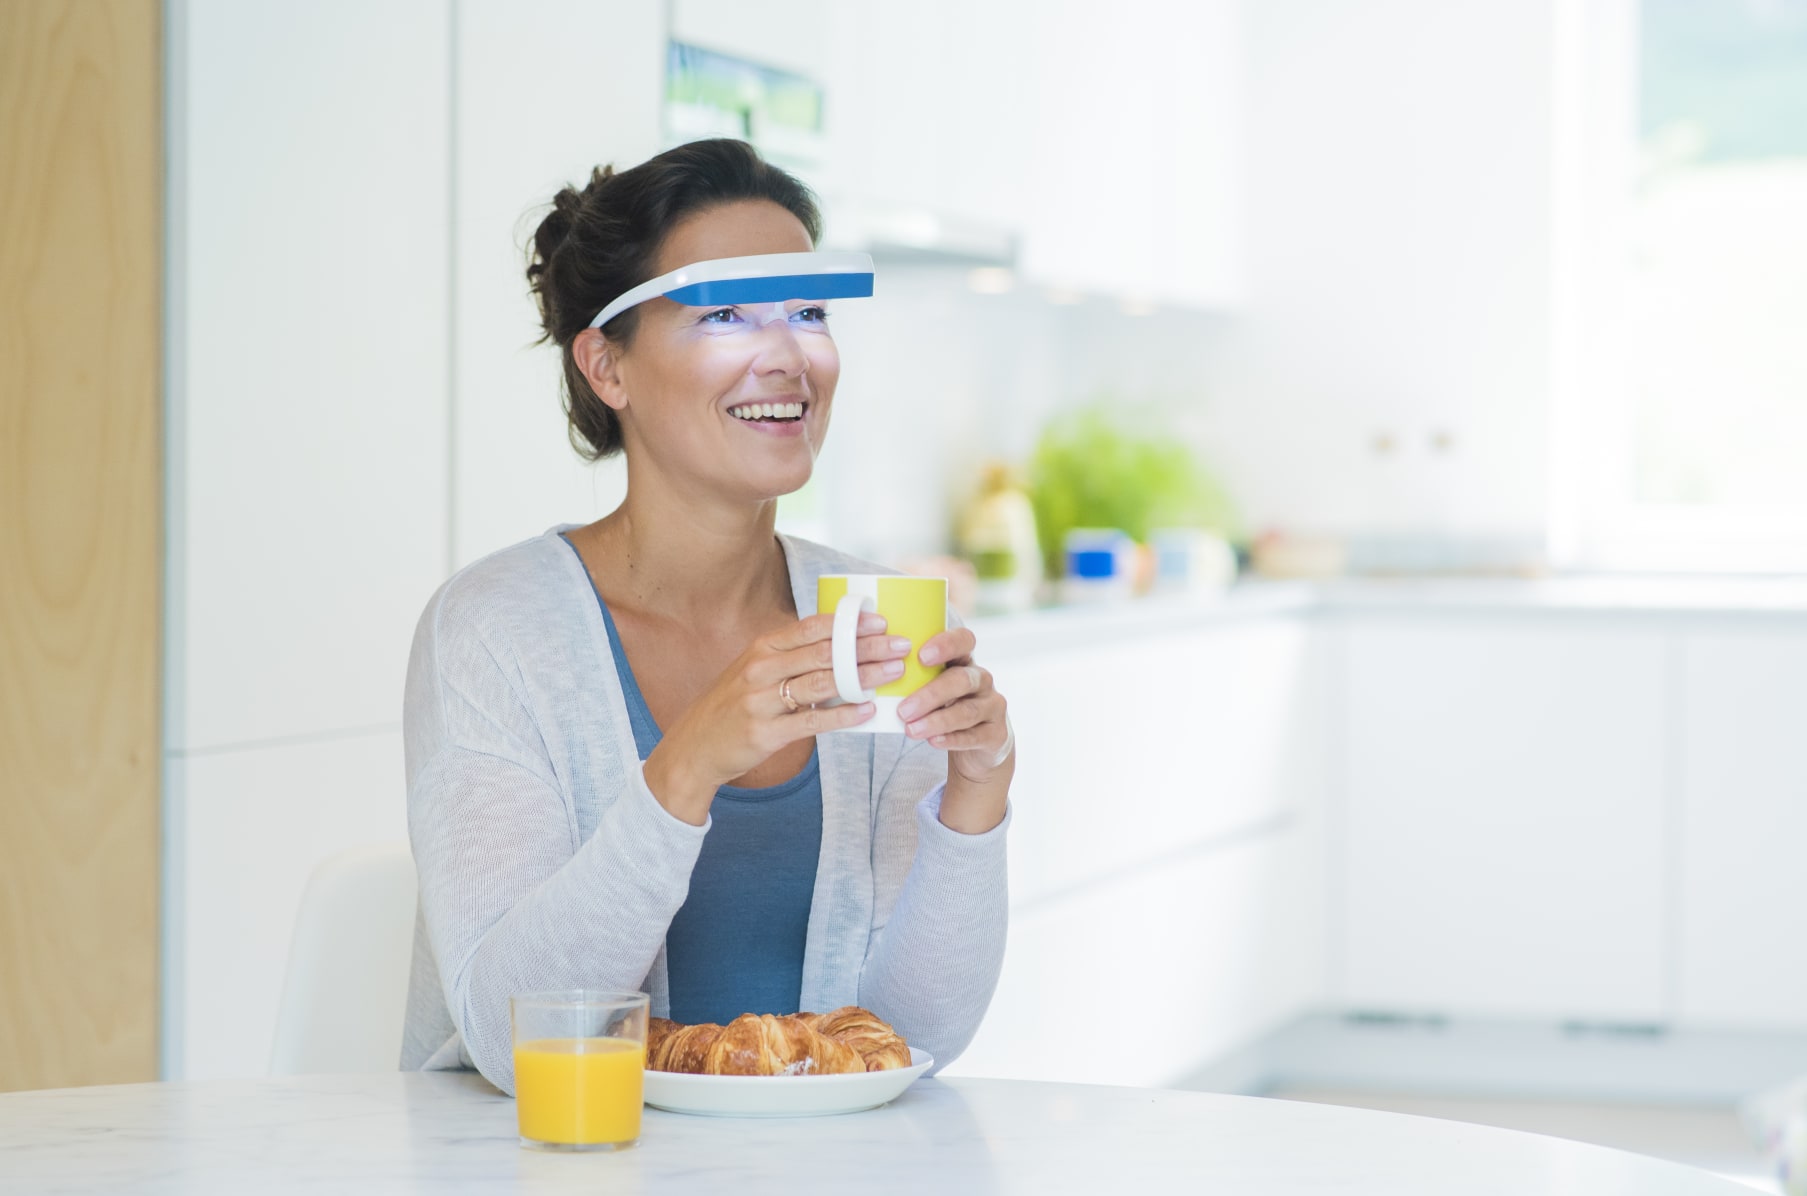 How to use Luminette® - Light therapy glasses 